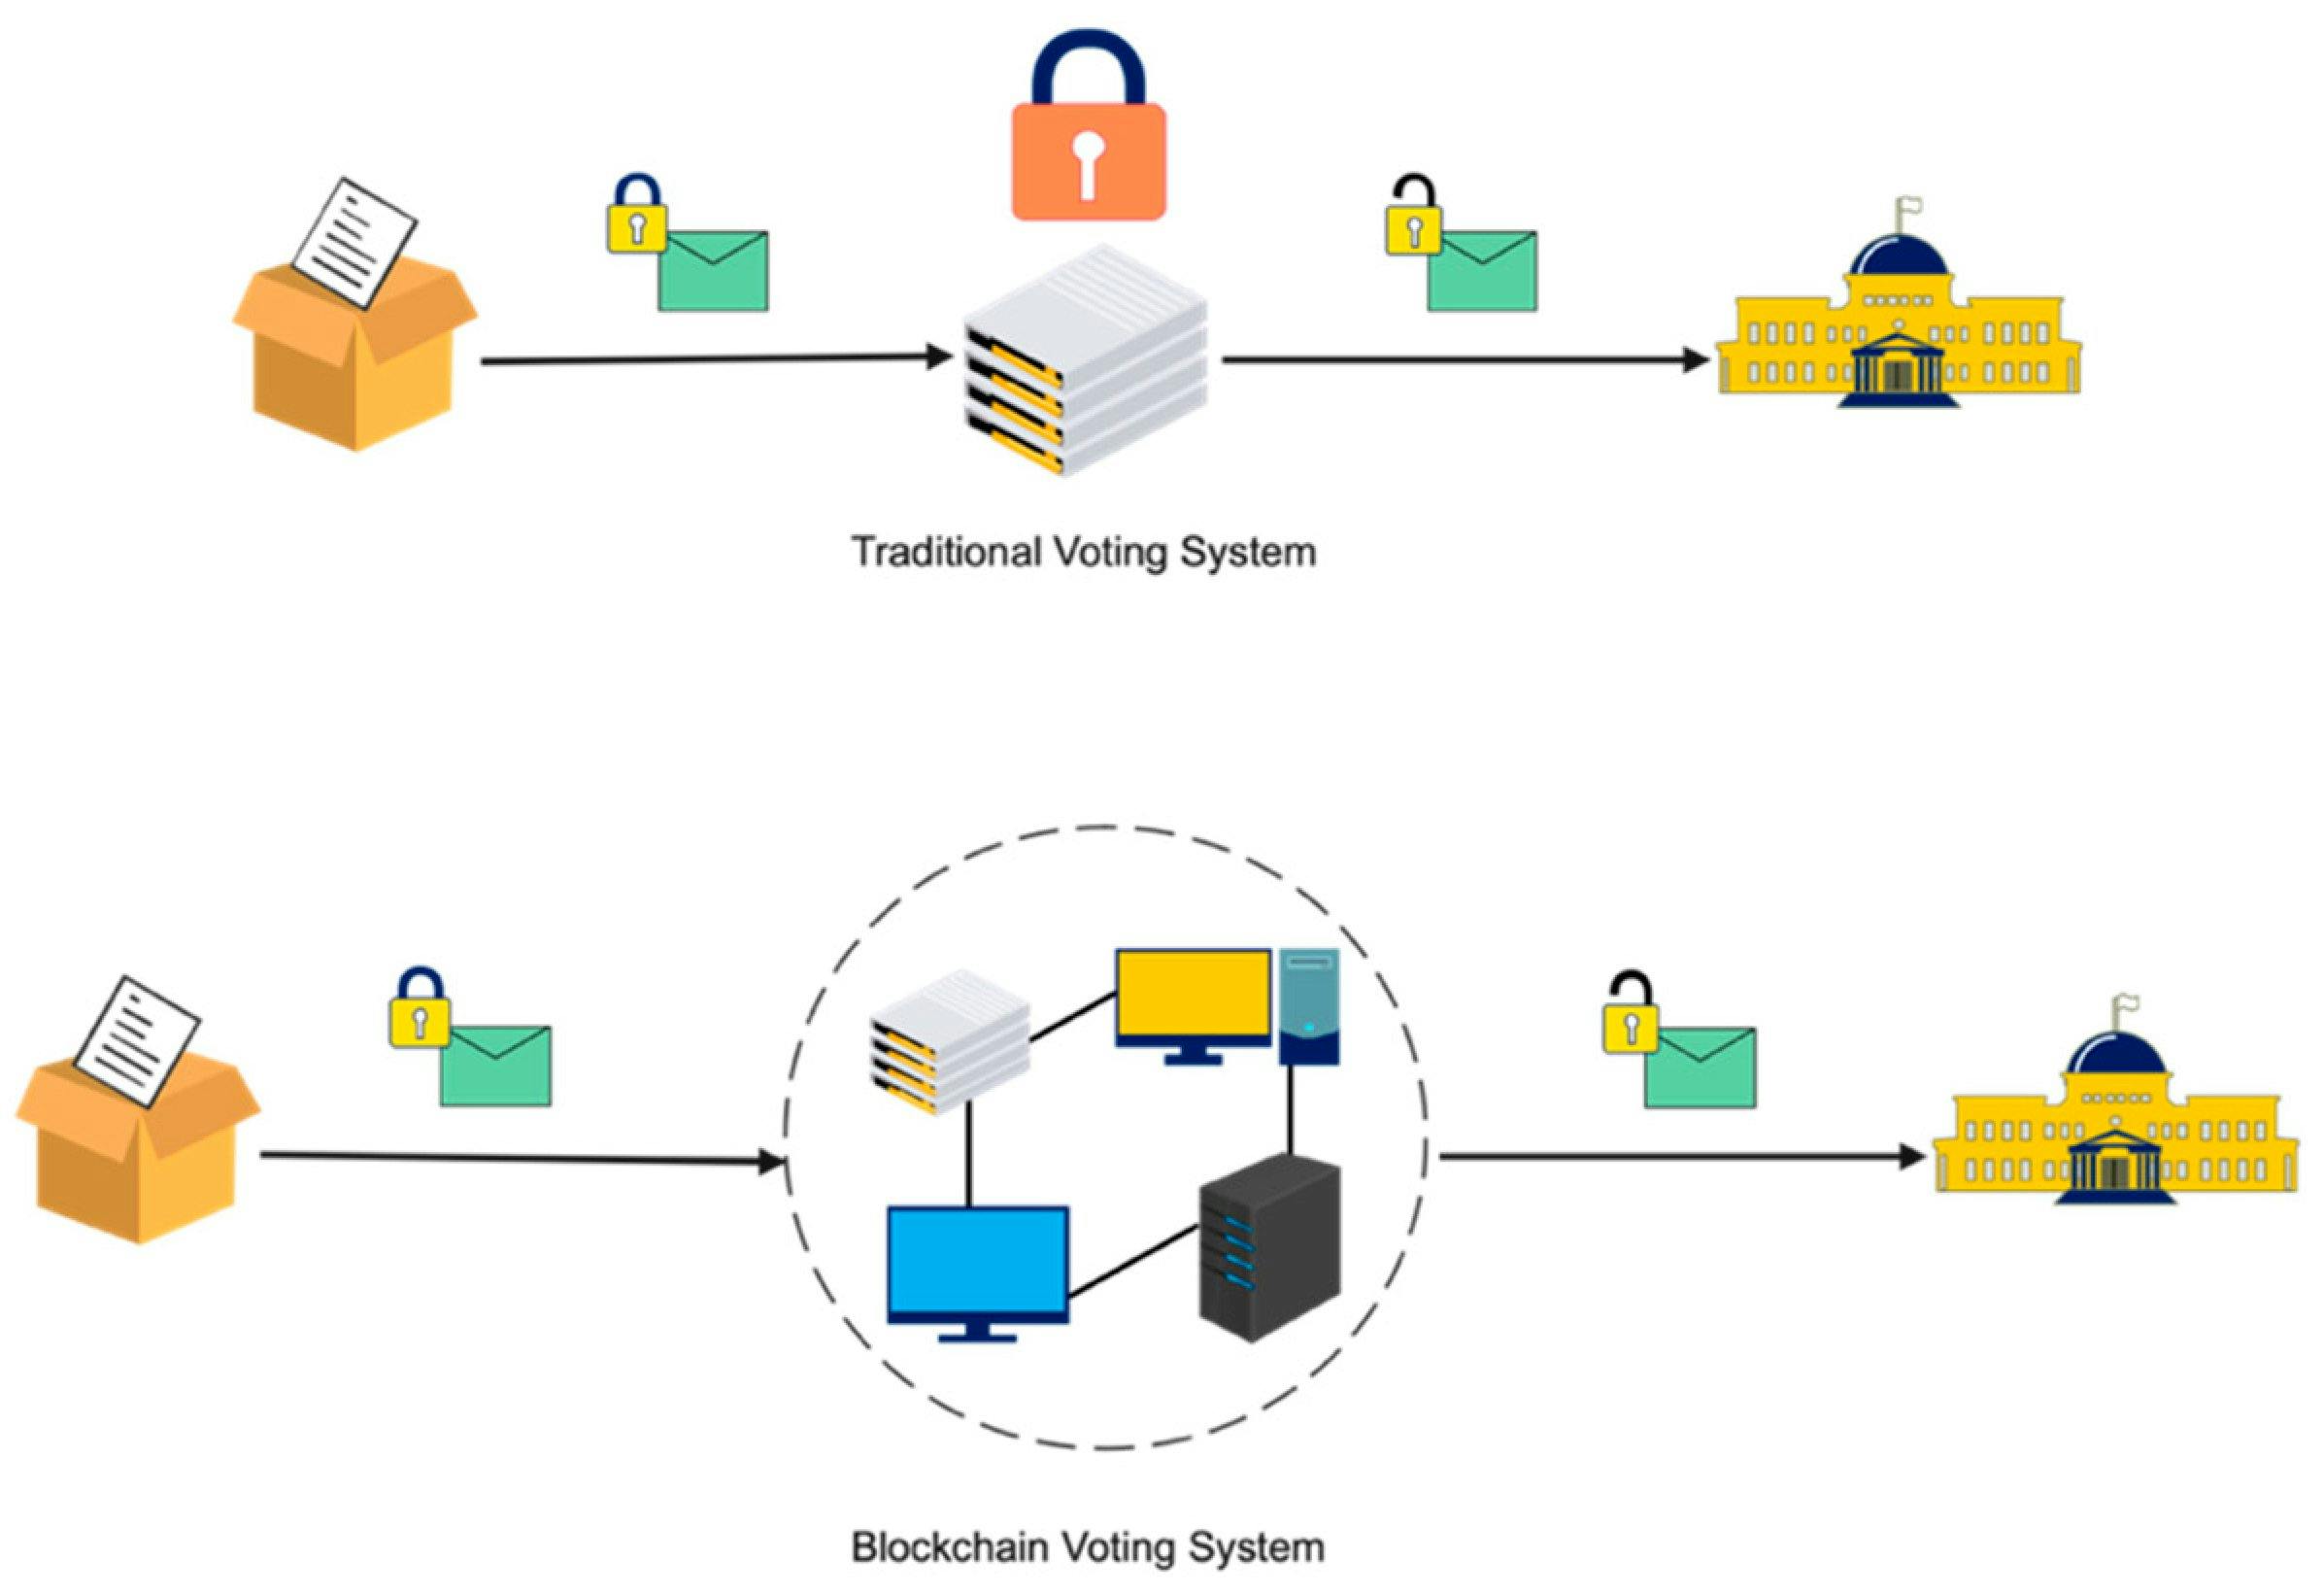 A comparison of traditional and blockchain voting systems